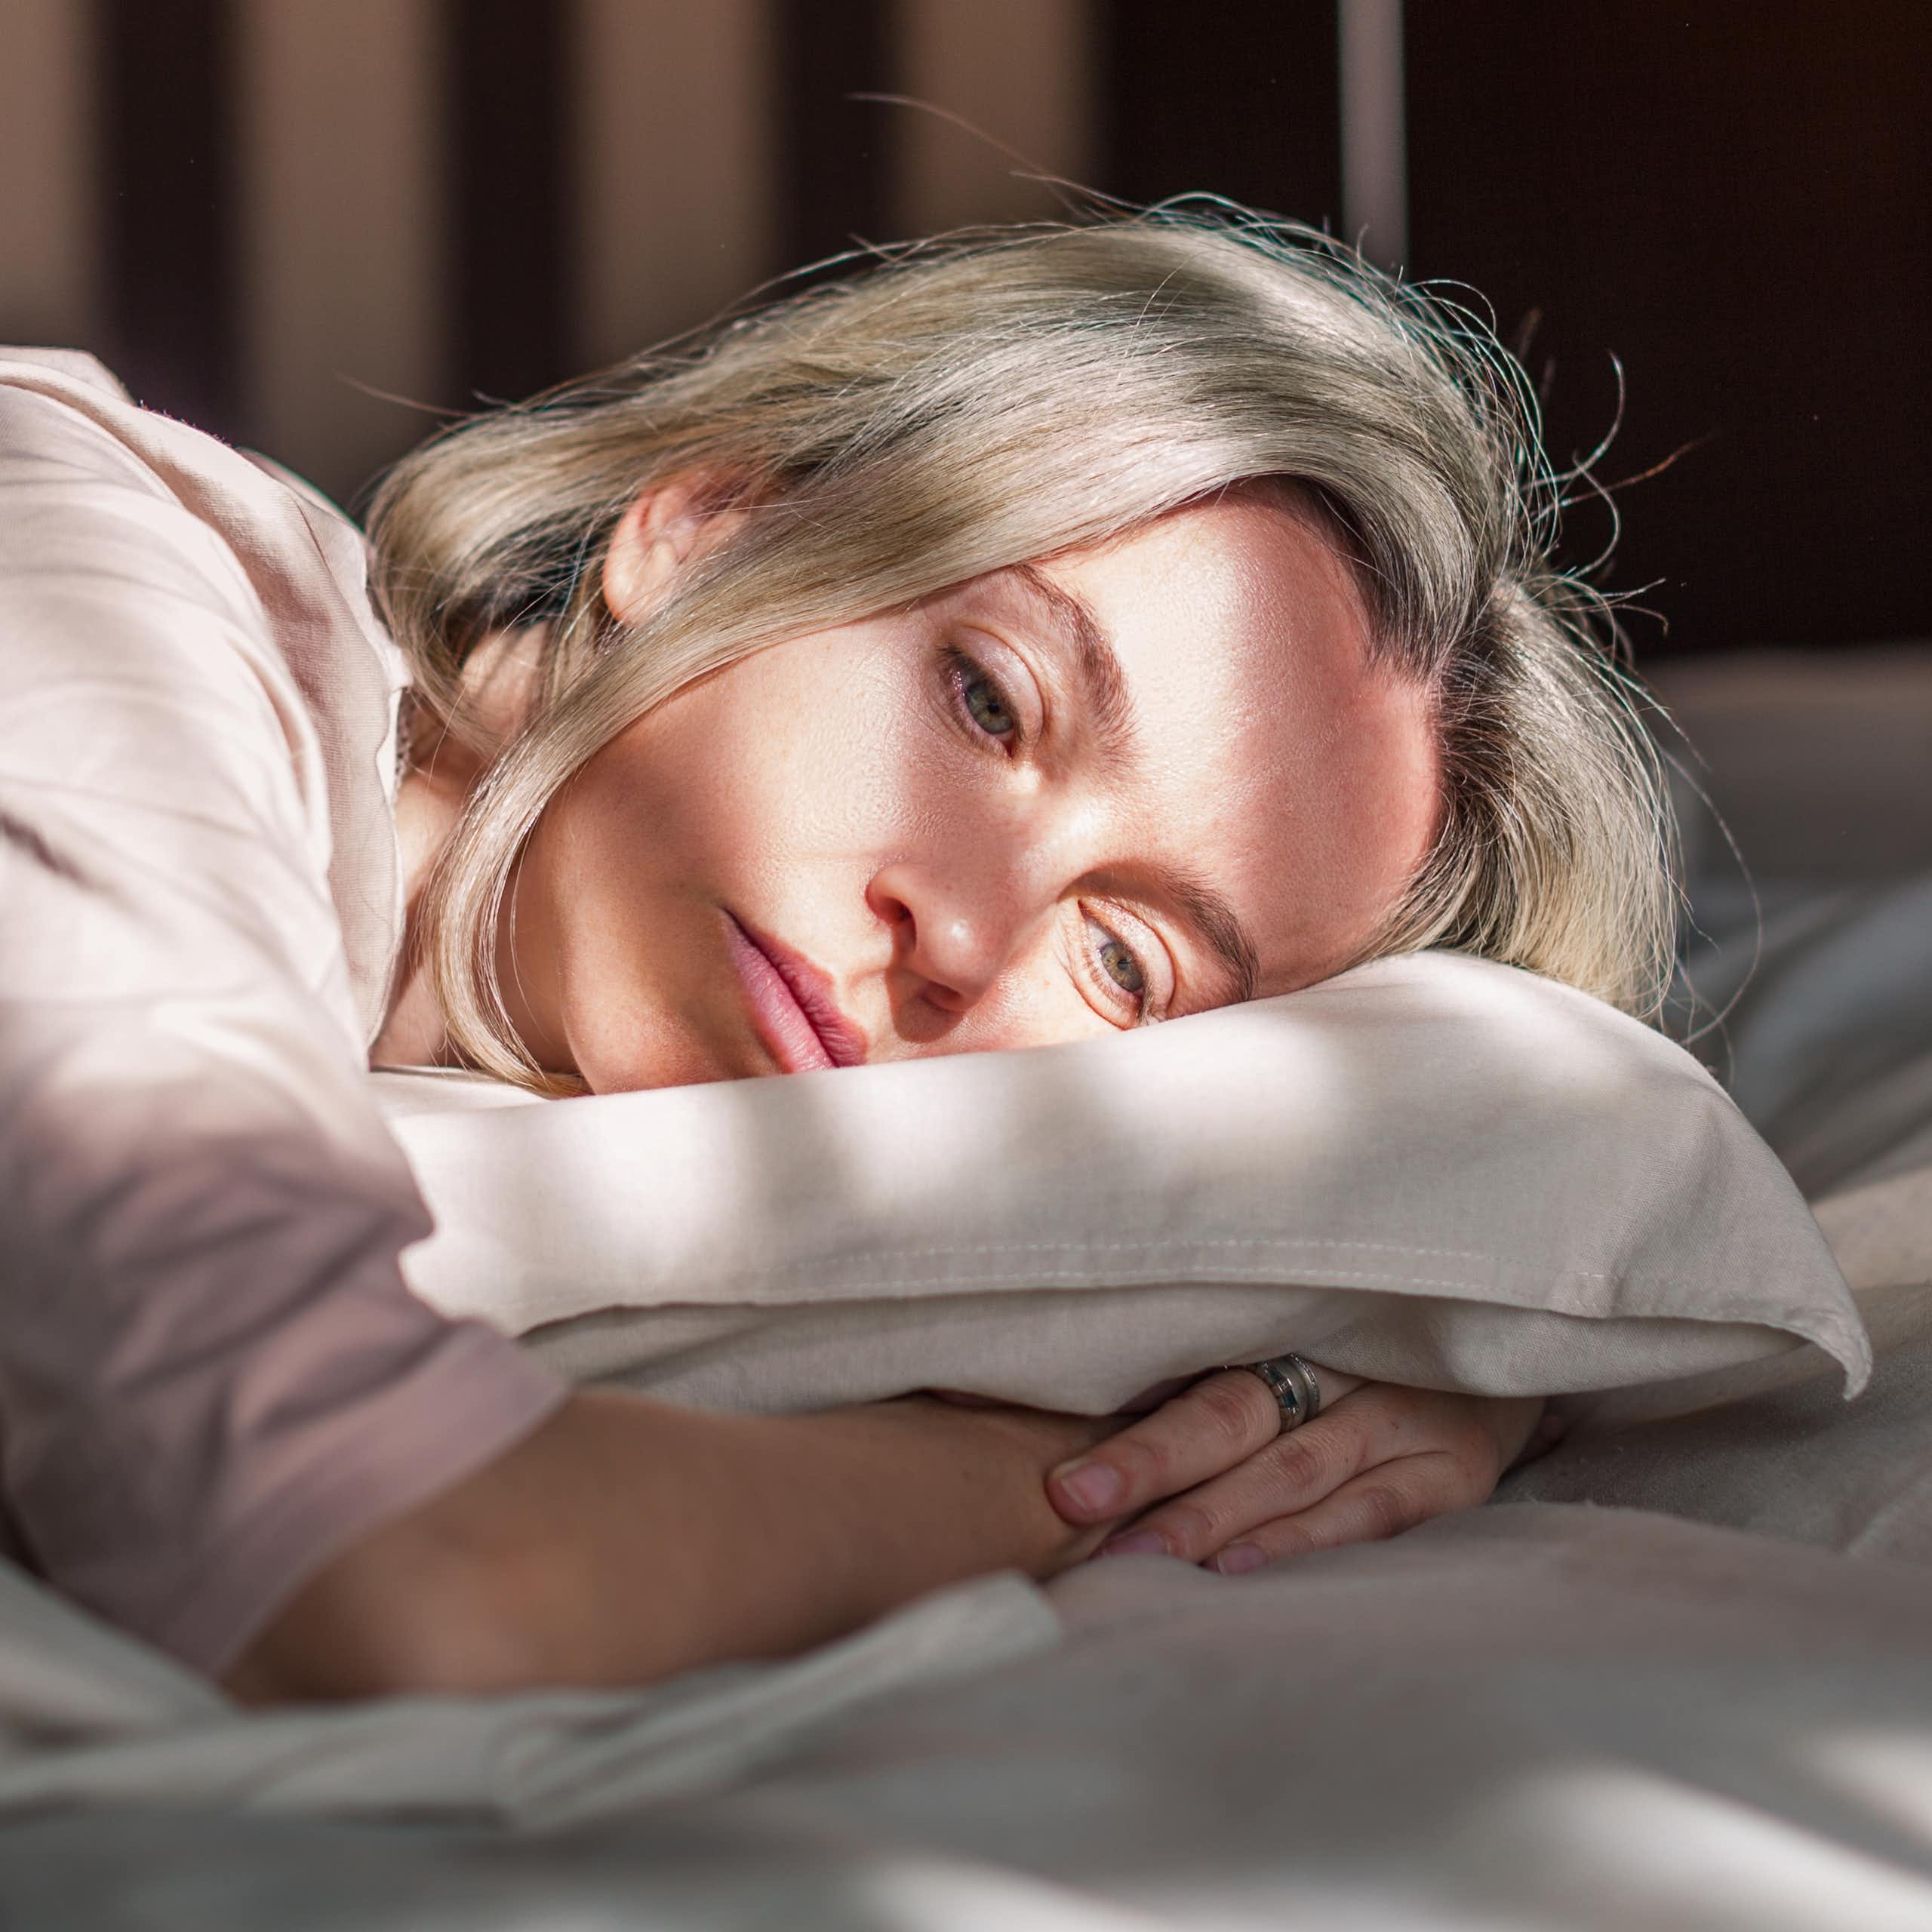 Woman lays in bed, looking sad